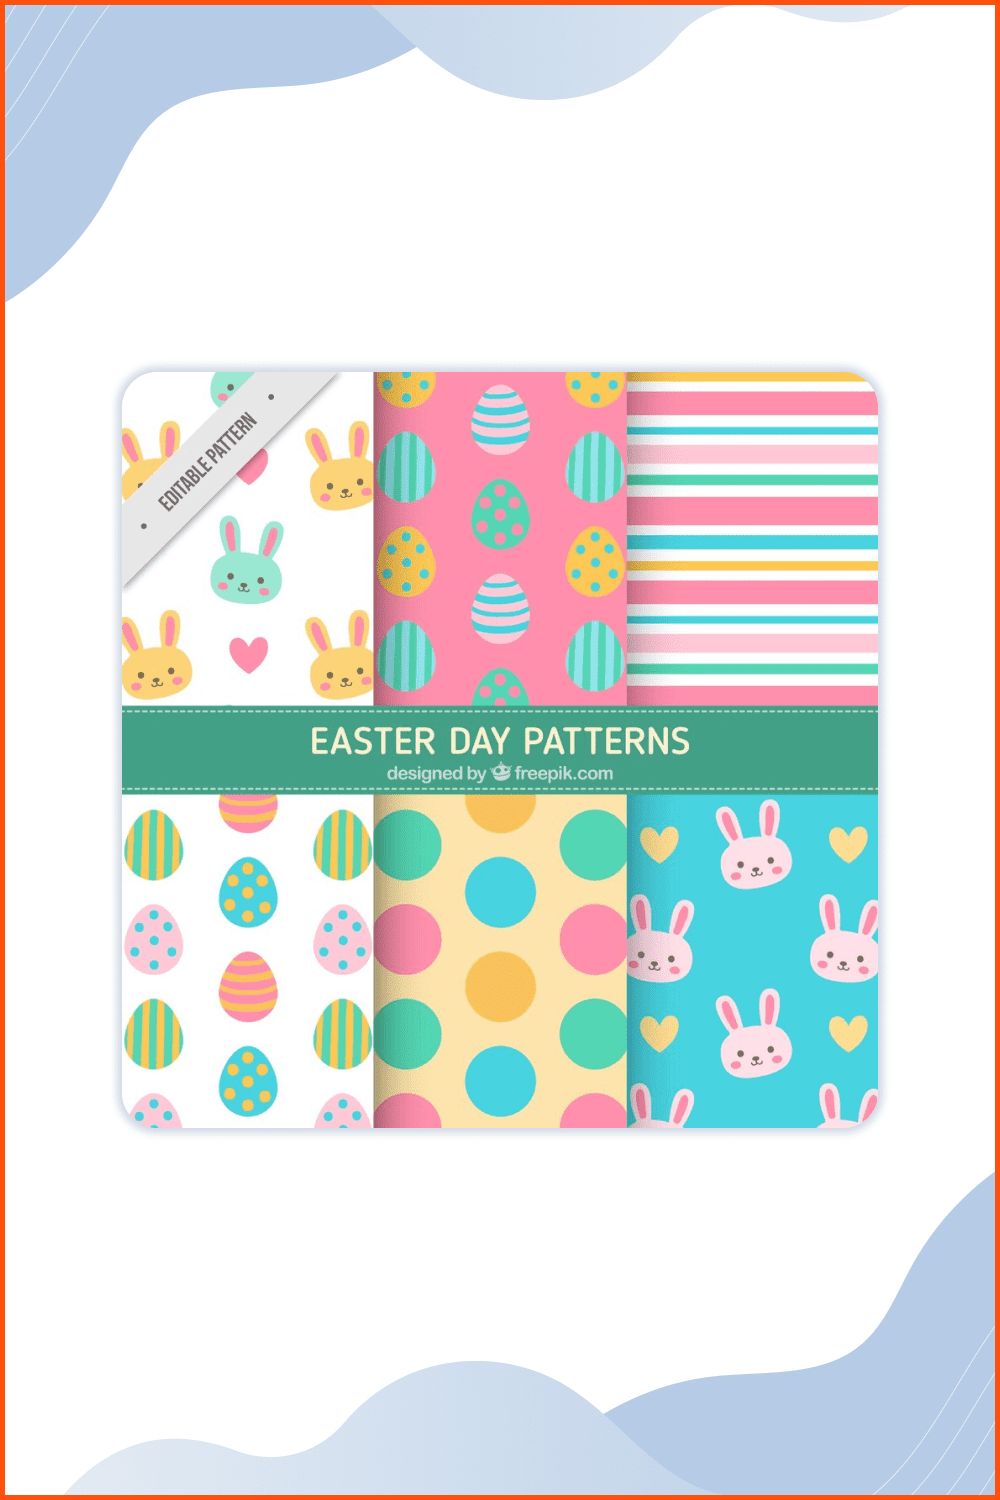 Free vector colorful easter patterns flat design.